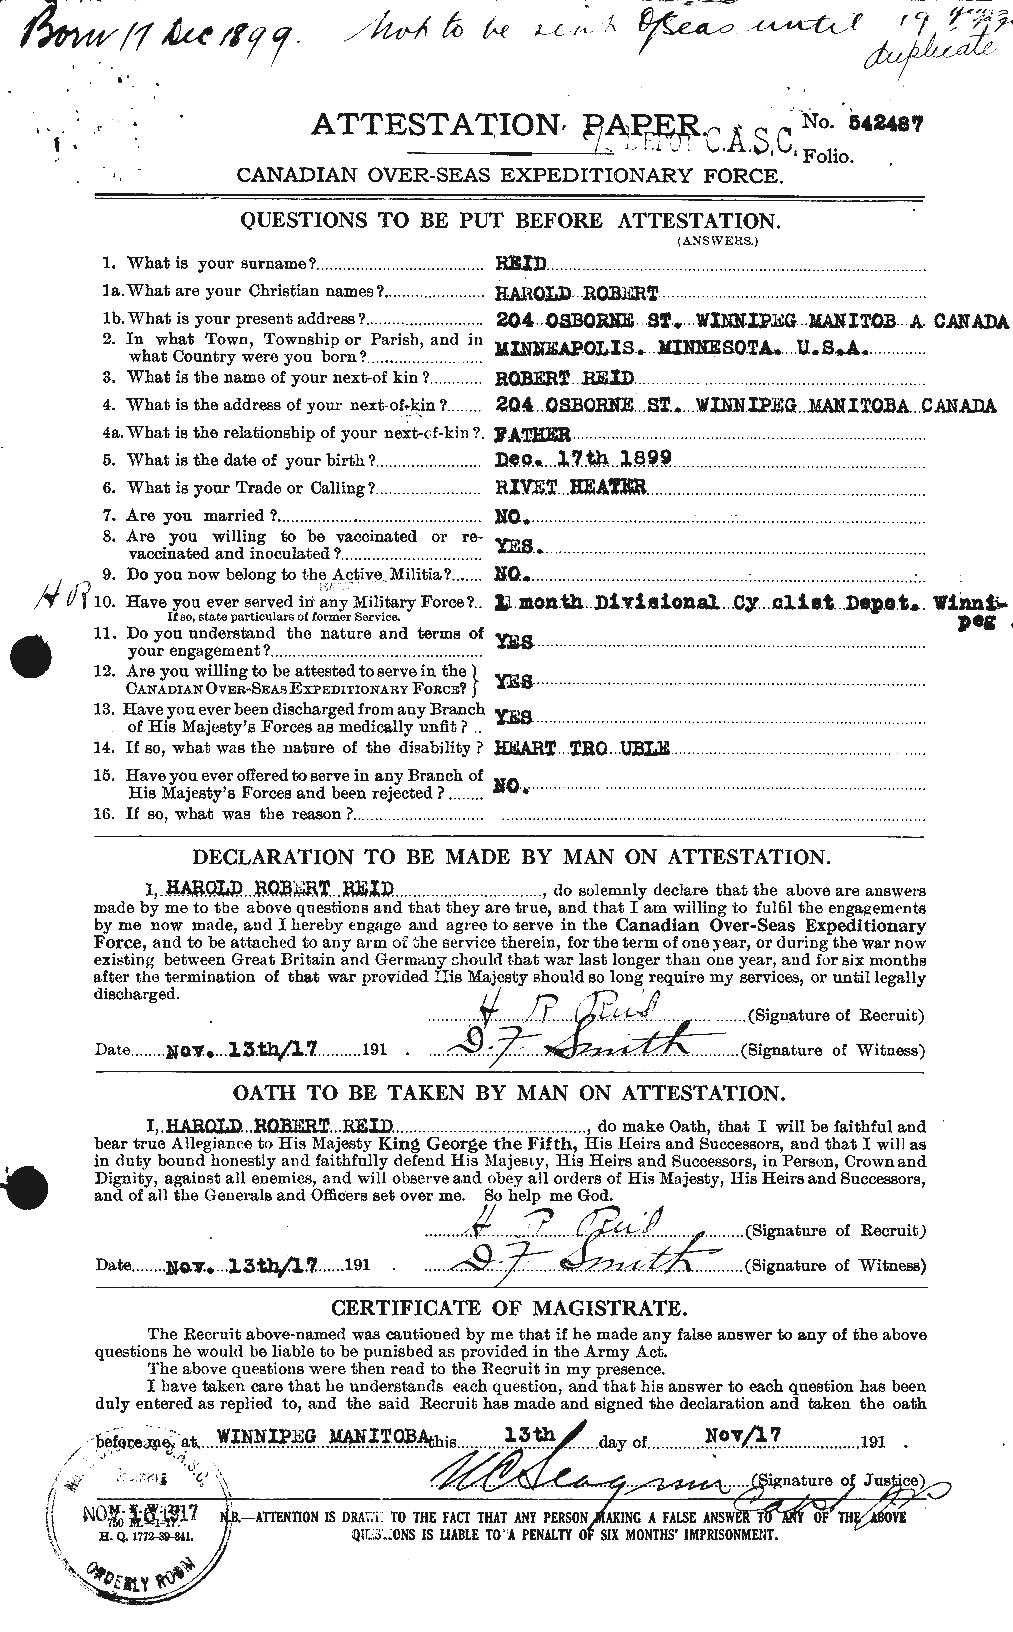 Personnel Records of the First World War - CEF 598565a